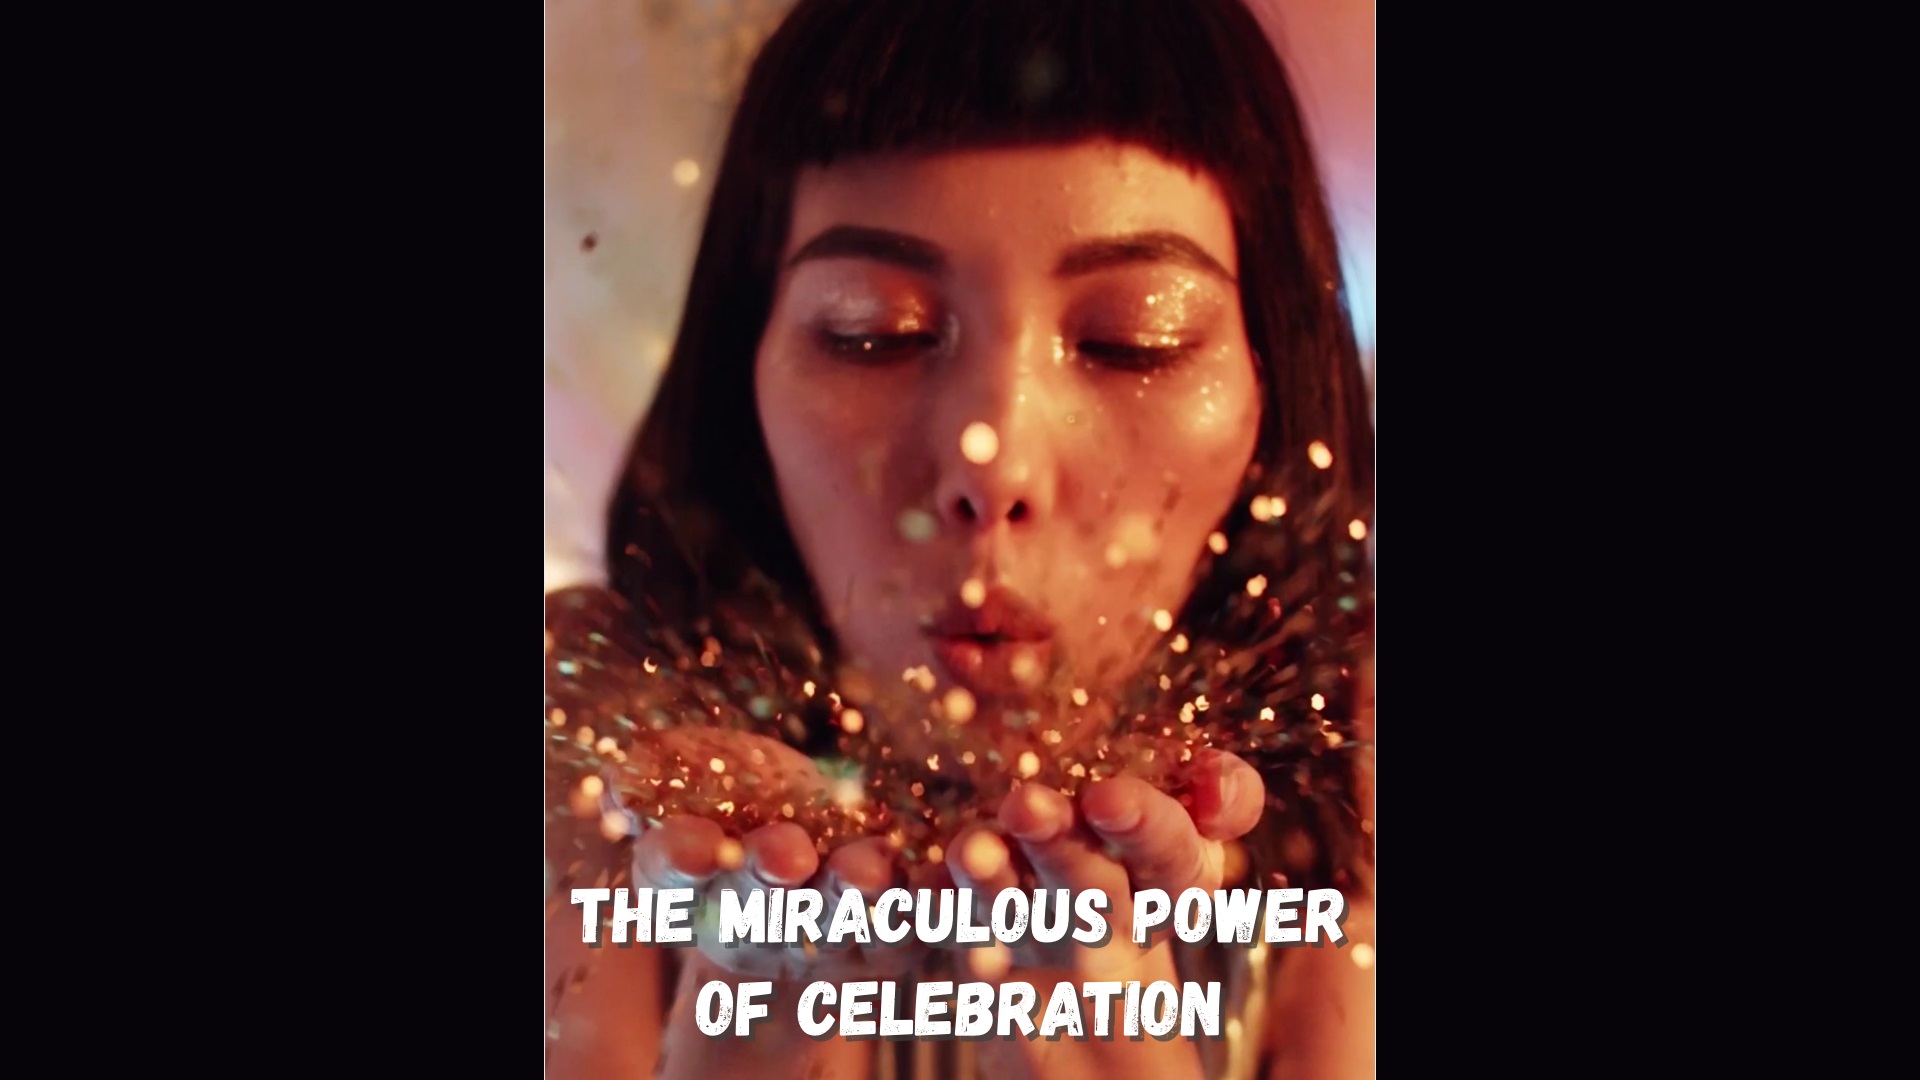 The Miraculous Power of Celebration... So how can we create a culture and habit of celebration? Where and how can we start this?